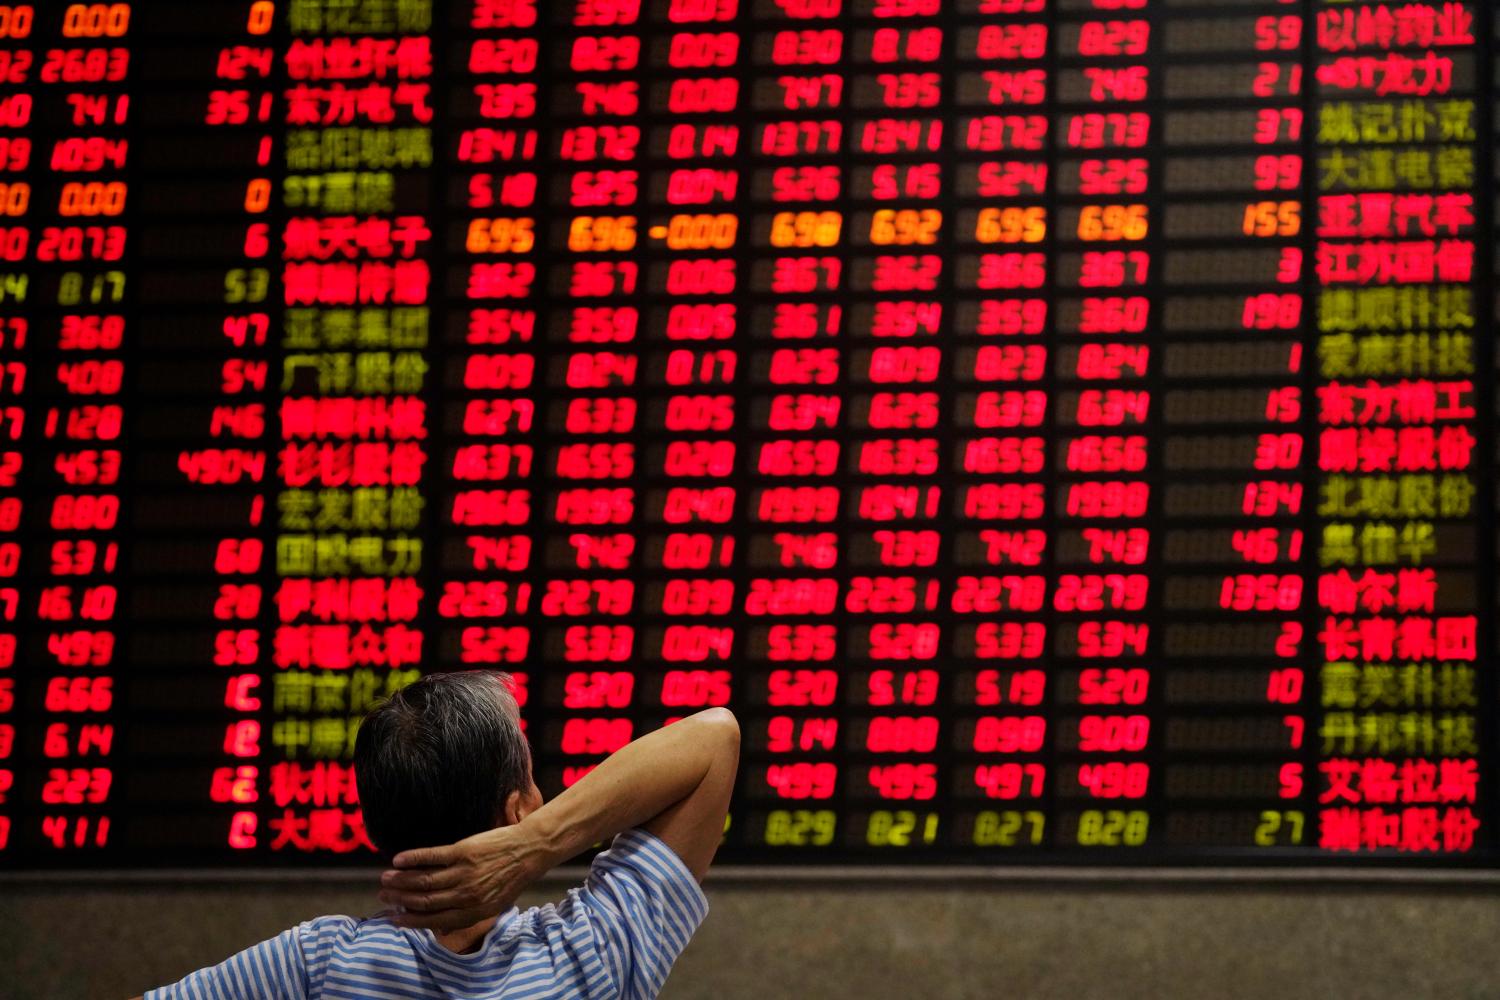 An investor looks at an electronic board showing stock information at a brokerage house in Shanghai, China September 7, 2018. REUTERS/Aly Song - RC192F4484F0